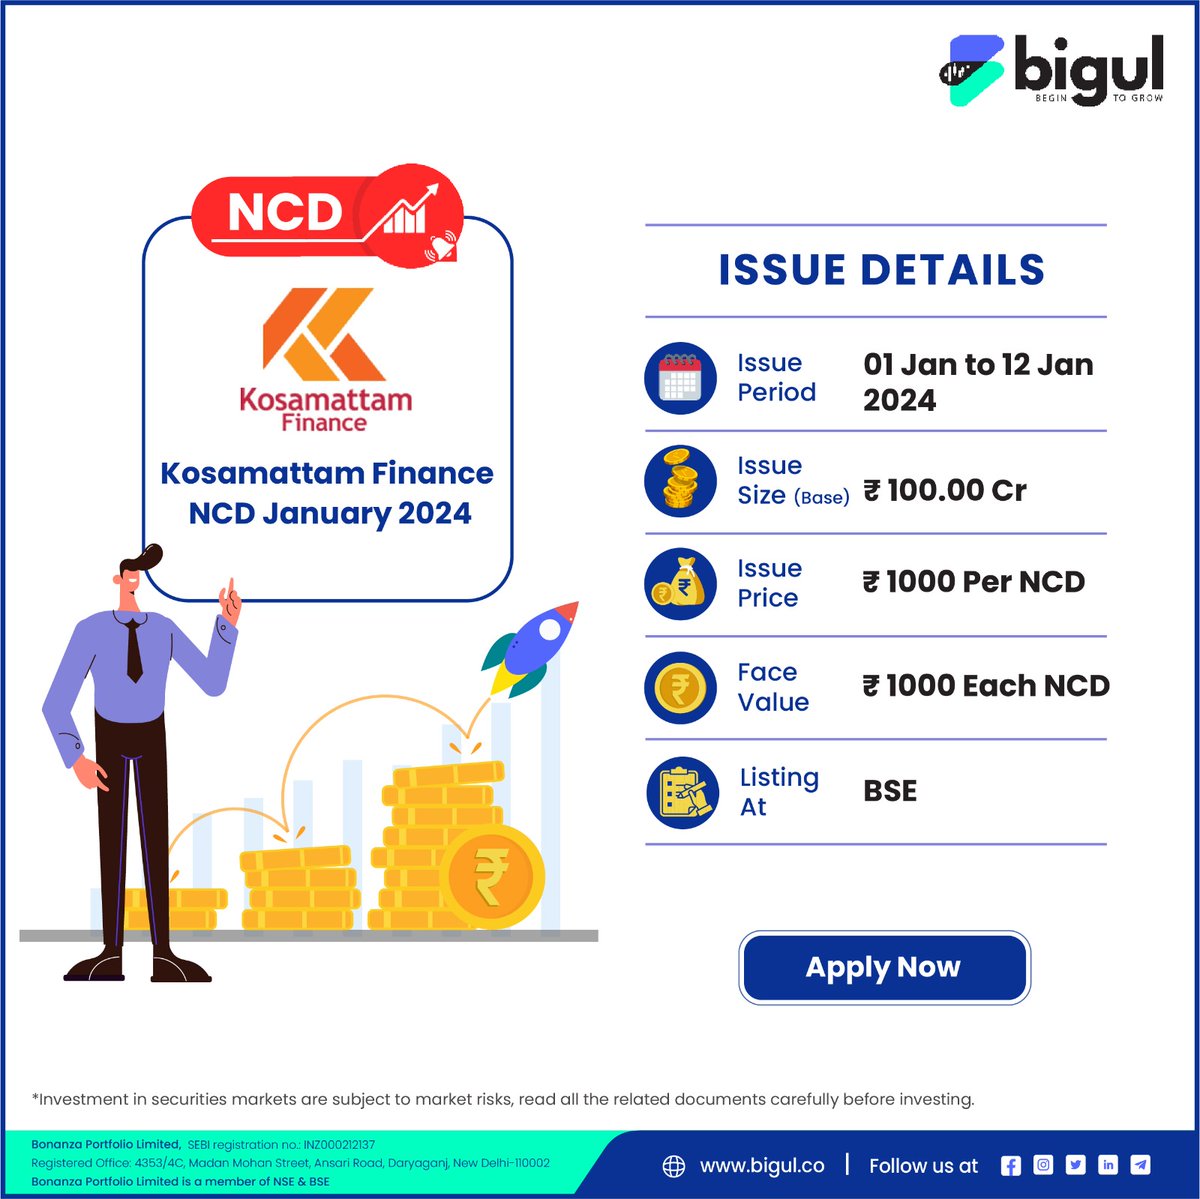 🚀#KosamattamFinance Limited unveils #NCDs with up to 10% interest! 🌟 Secure, non-convertible debentures opening on Jan 1, 2024. Issue size Rs 100 Cr (expandable to Rs 200 Cr), face value Rs 1000.  Act now! 💰📈 
Details👇
bit.ly/4aPJpI3
#KosamattamFinanceNCD #Finance…